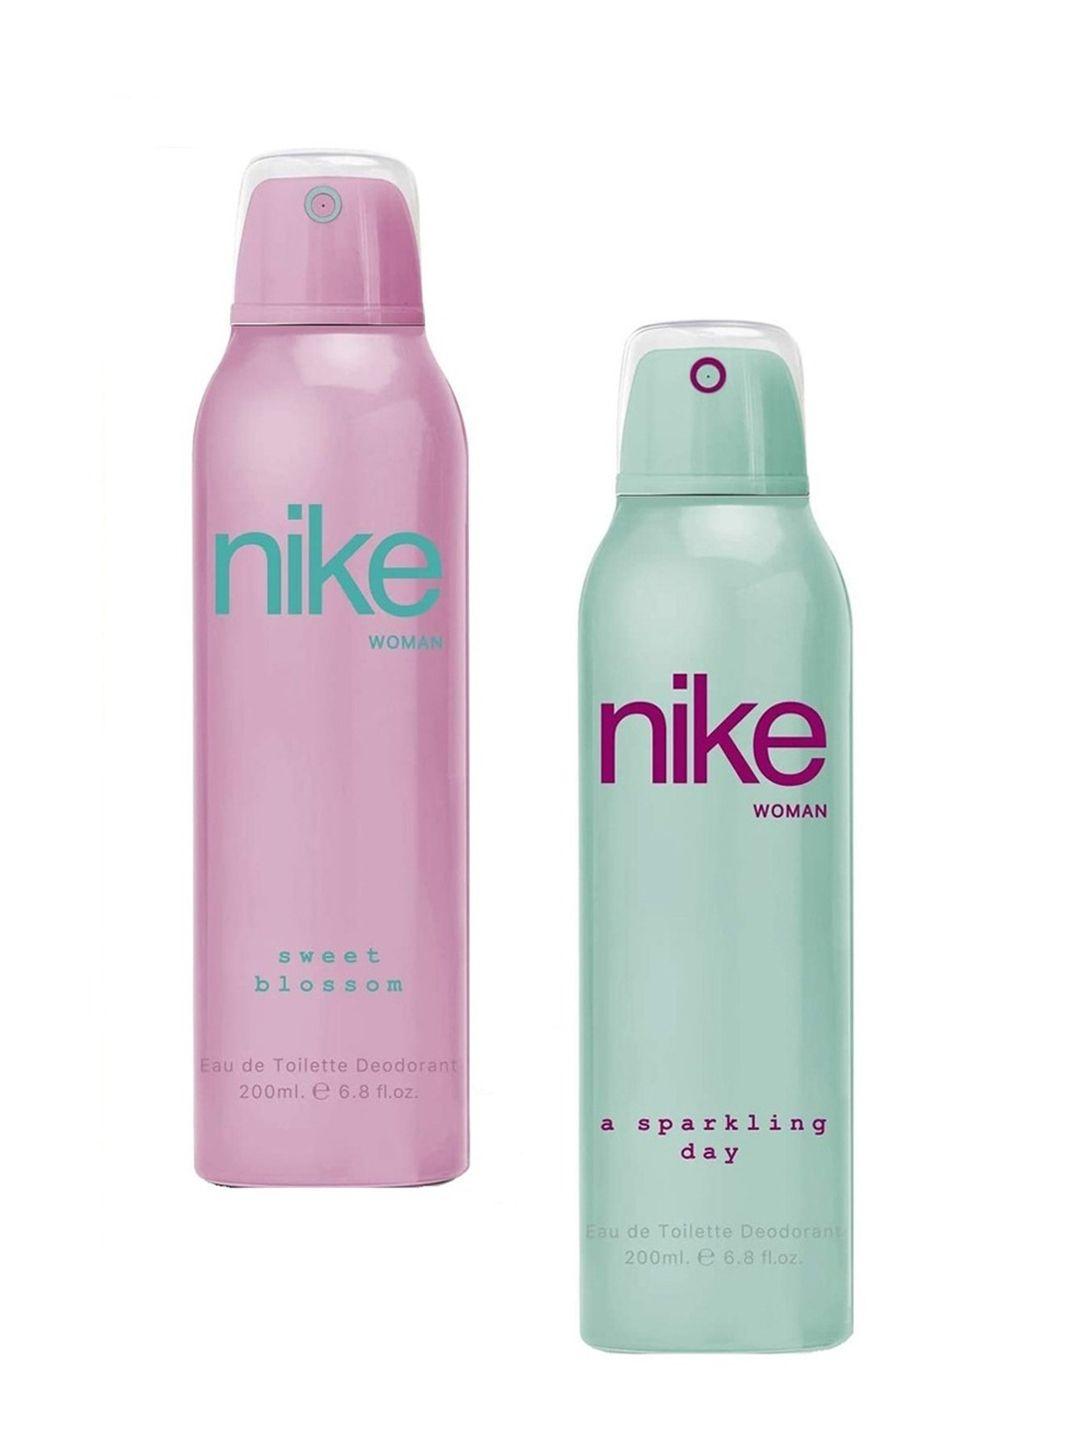 nike pack of 2 woman sweet blossom & a sparkling day deodorant- 200ml each